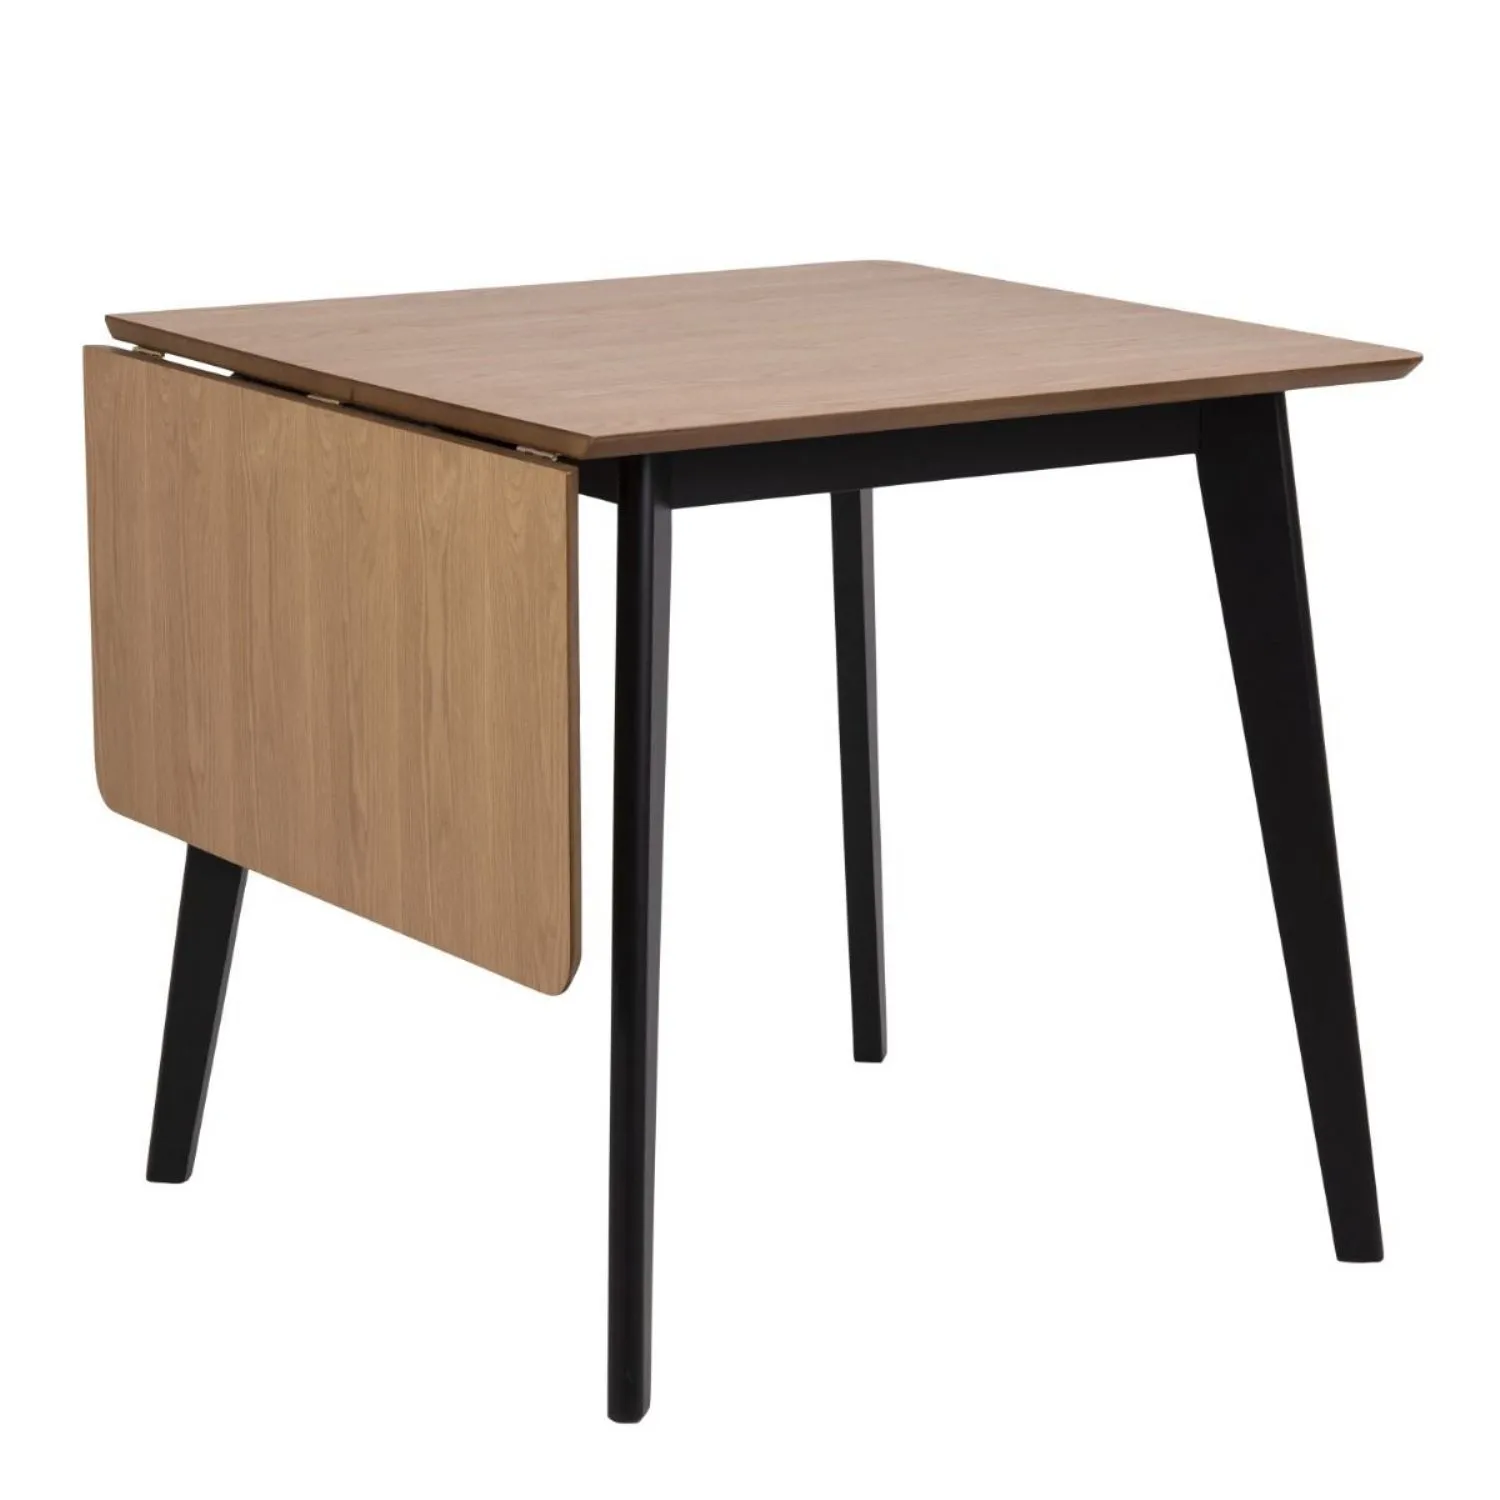 Roxby Extending Dining Table 80120cm in Oak And Black